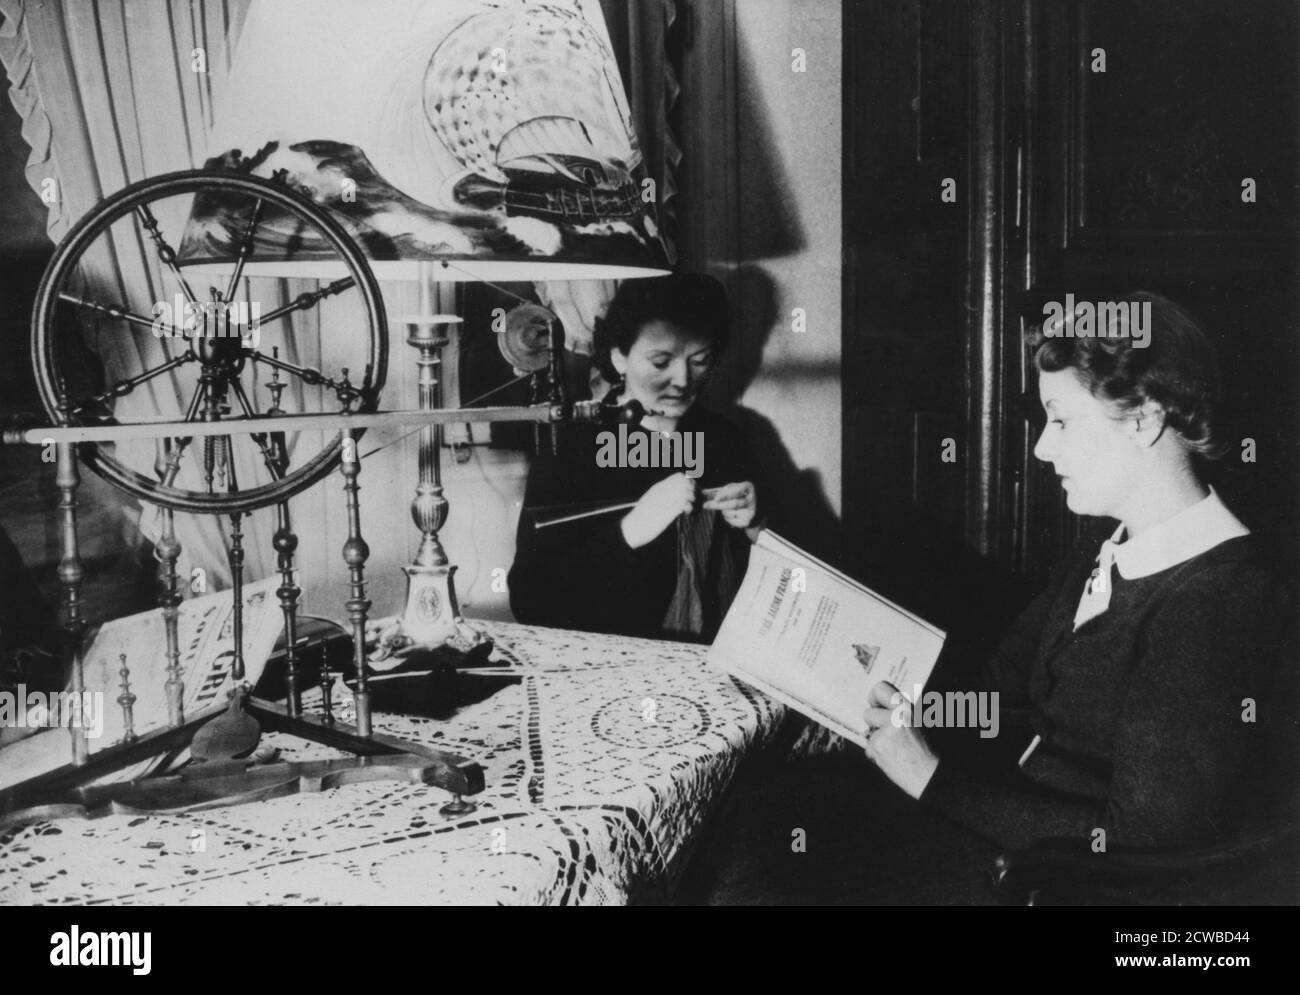 Two women at home, France, 1939. The woman in the foreground is reading a copy of Le Livre Jaune Francais, a book published by the French Foreign Ministry relating to diplomatic negotiations between Britain, France, Poland and Germany before the outbreak of World War II. The photographer is unknown. Stock Photo